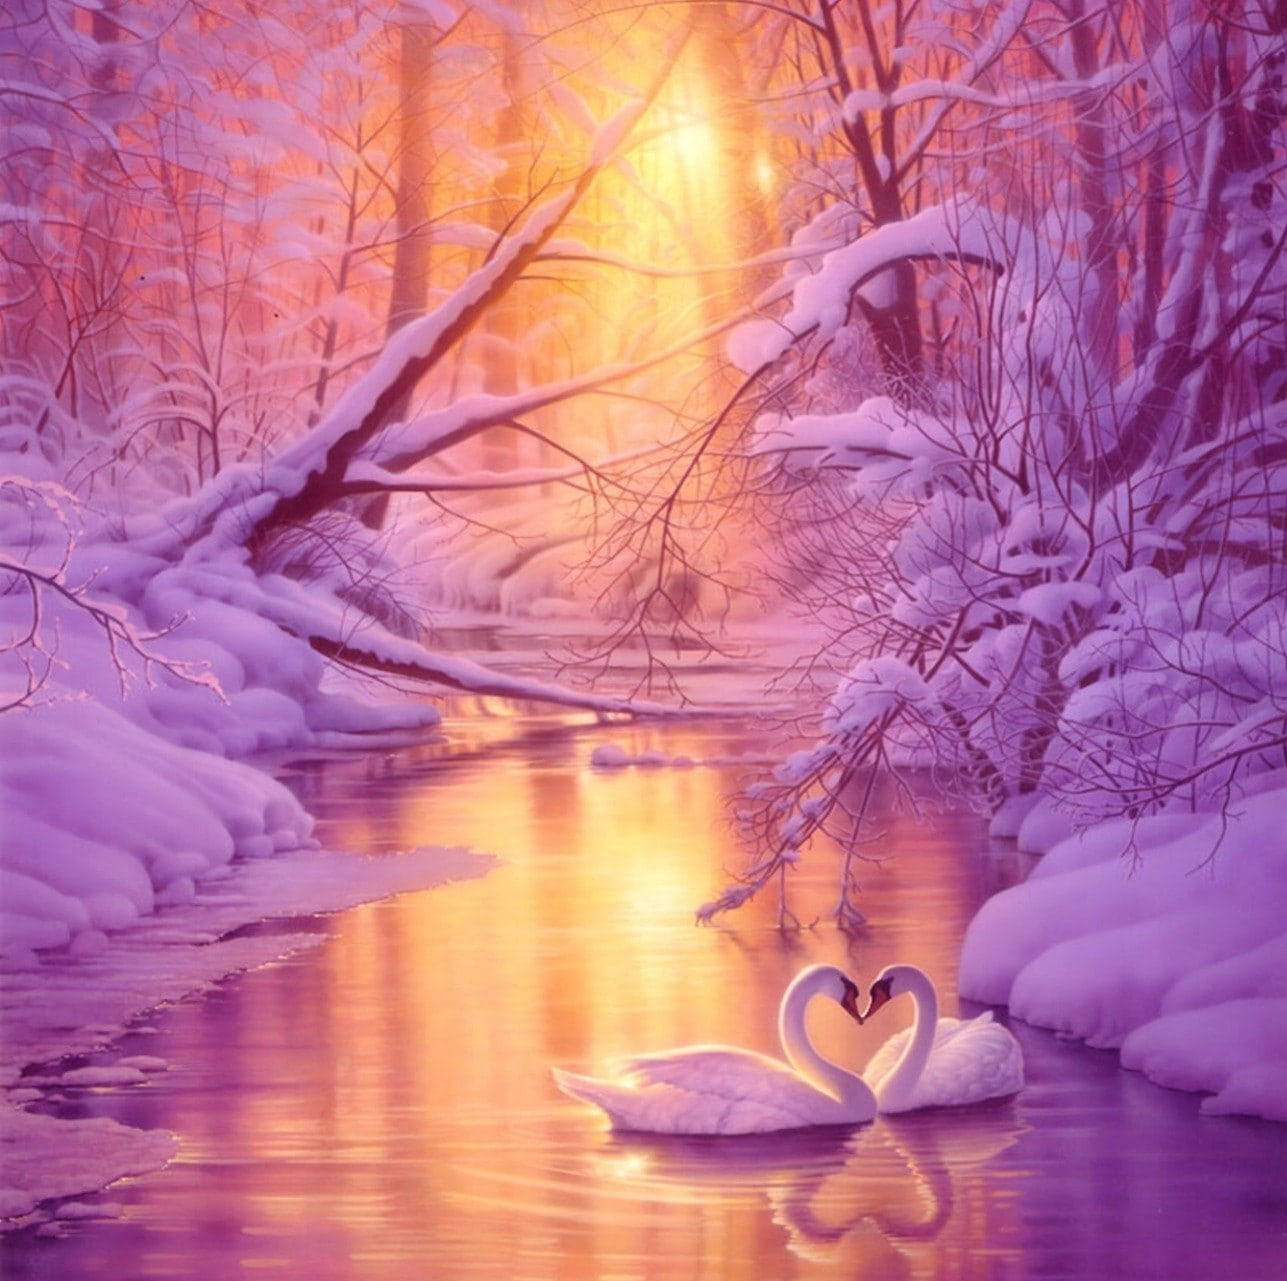 Swans In Snow Love Nature Wallpaper